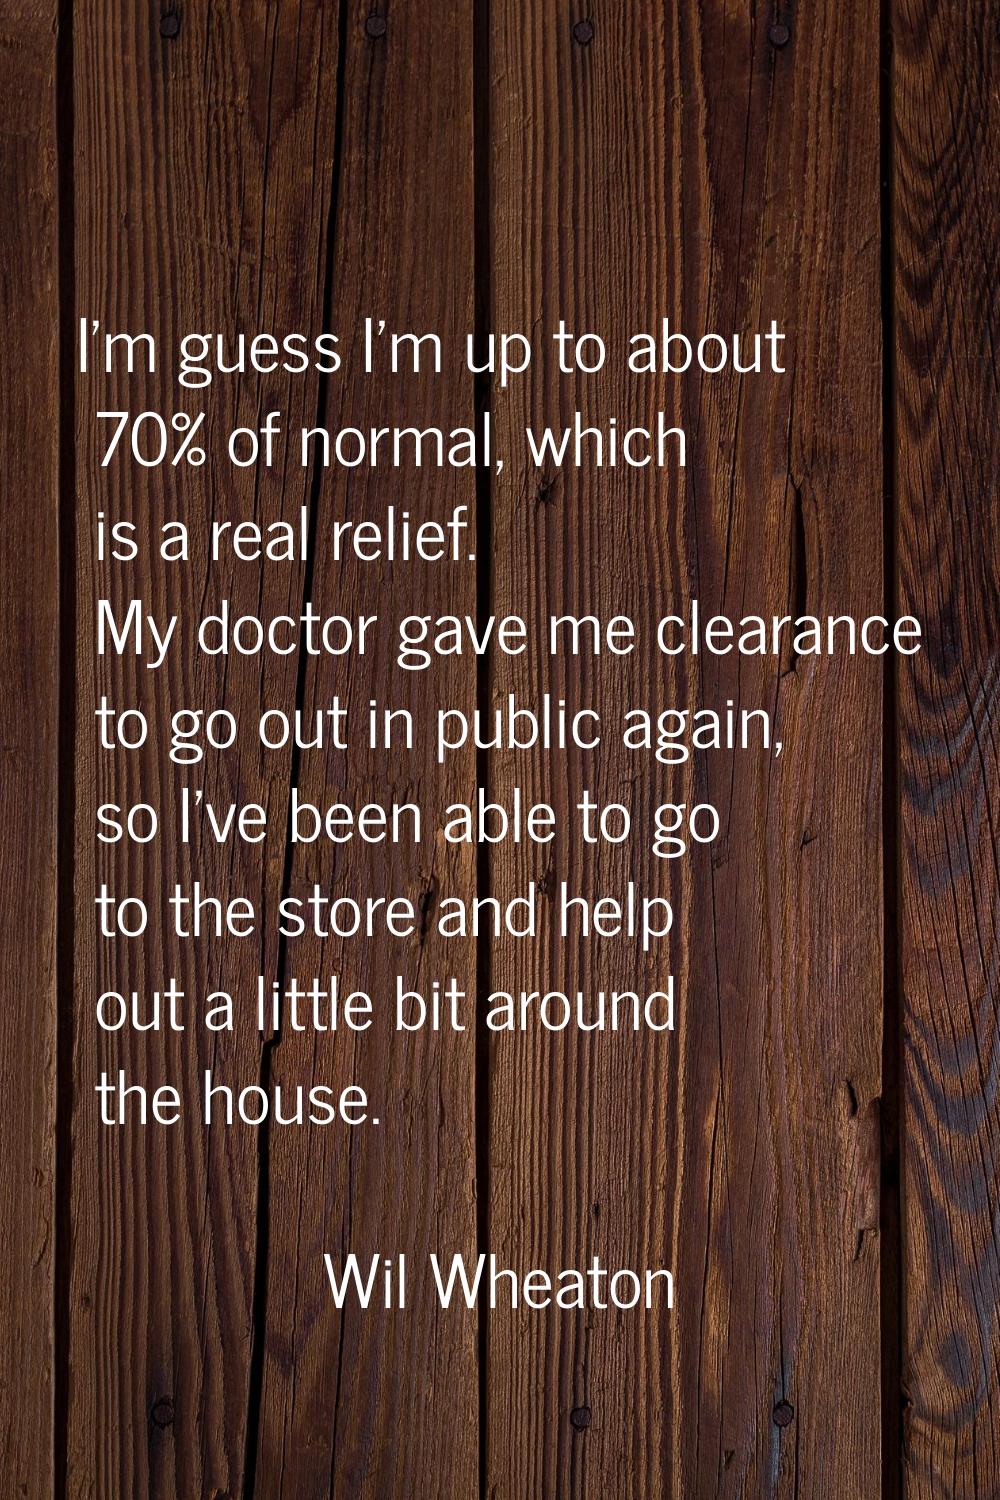 I'm guess I'm up to about 70% of normal, which is a real relief. My doctor gave me clearance to go 